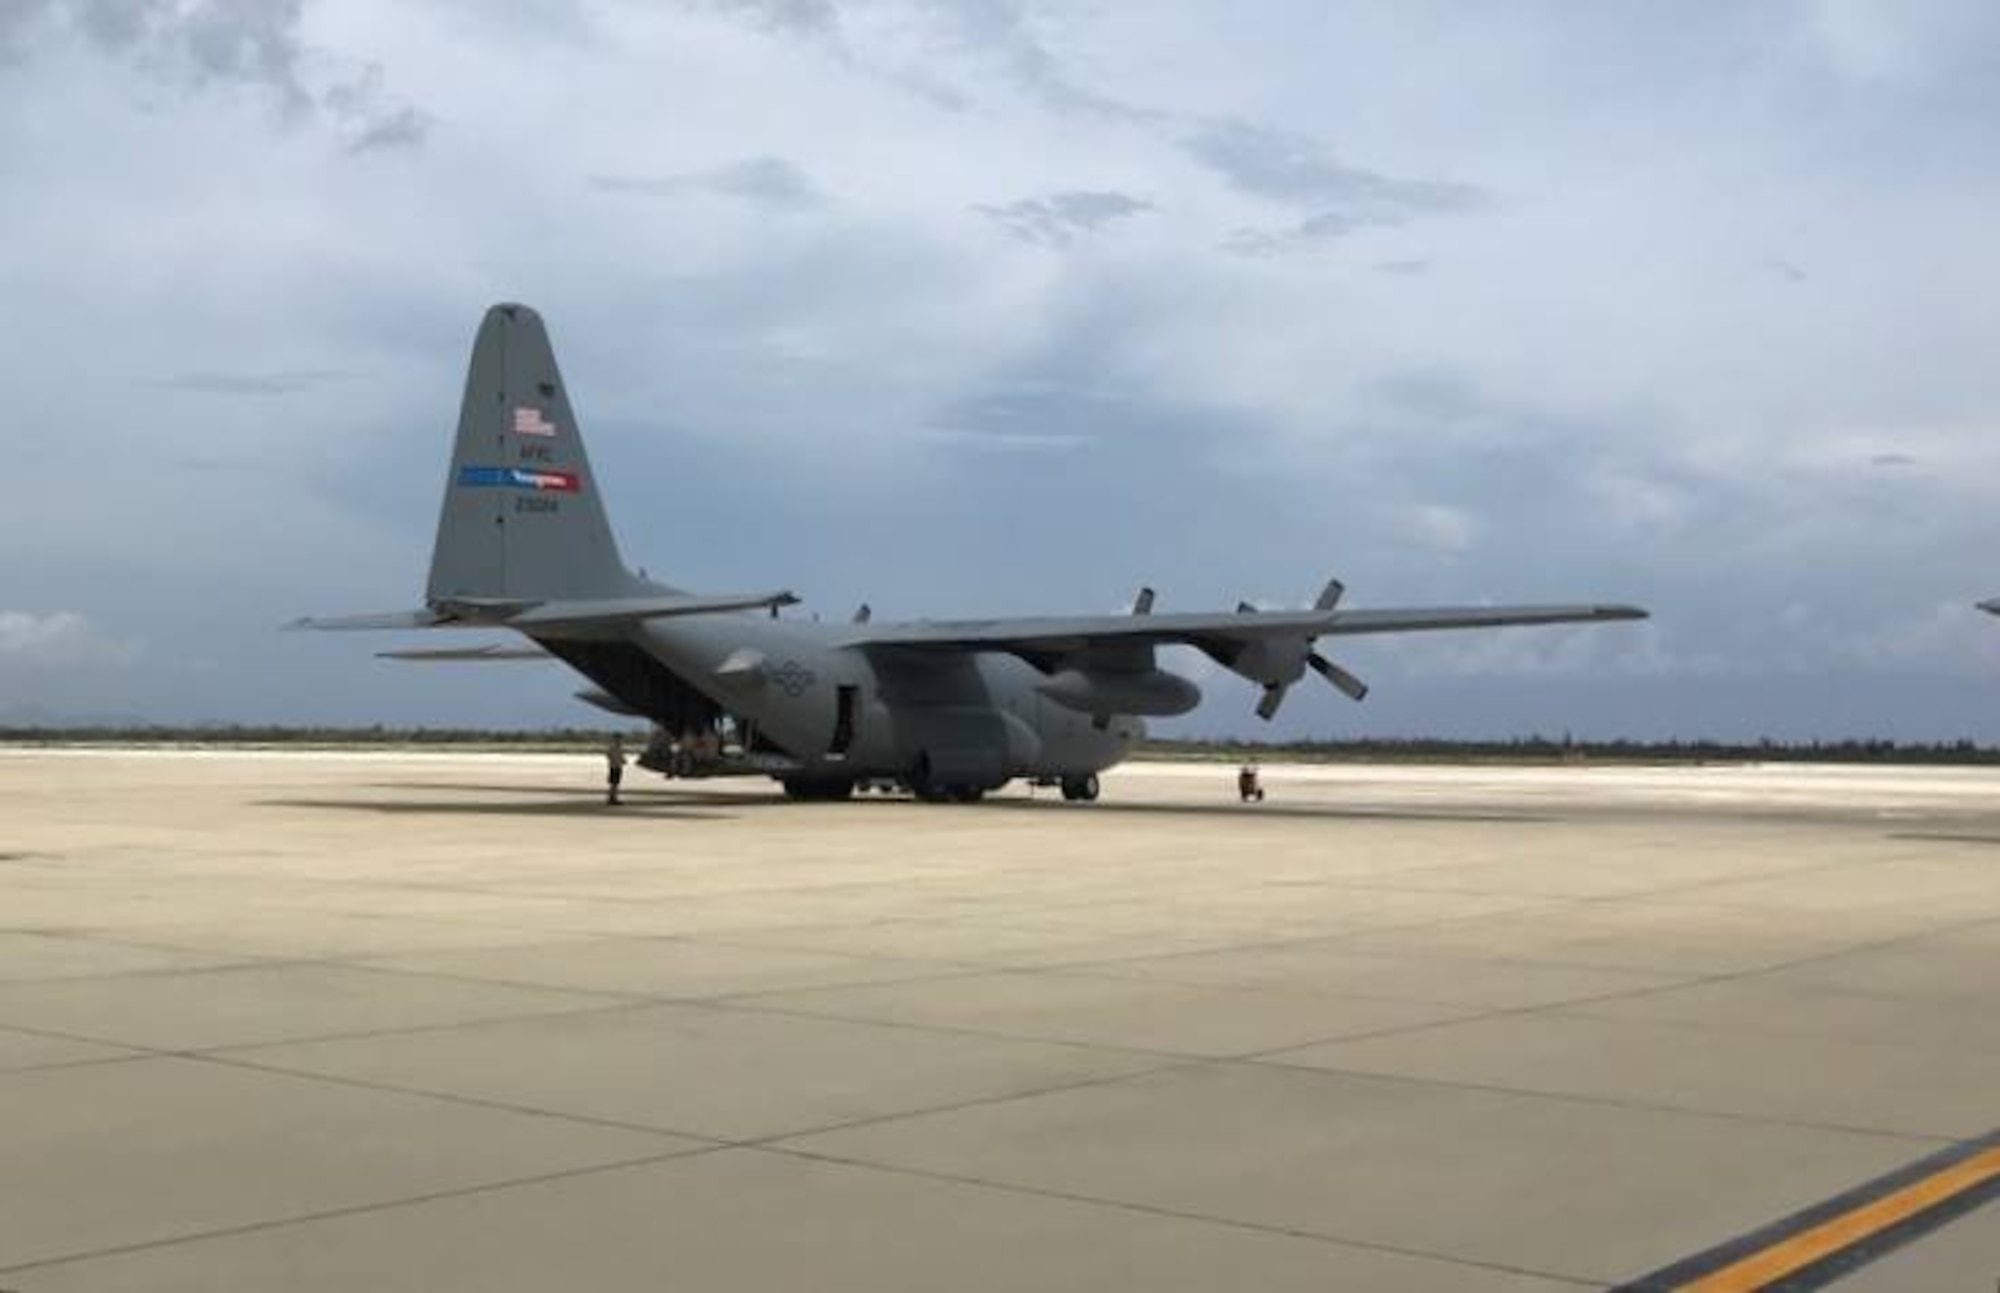 A 910th Airlift Wing C-130H Hercules aircraft sits on the ramp at Curacao International Airport.